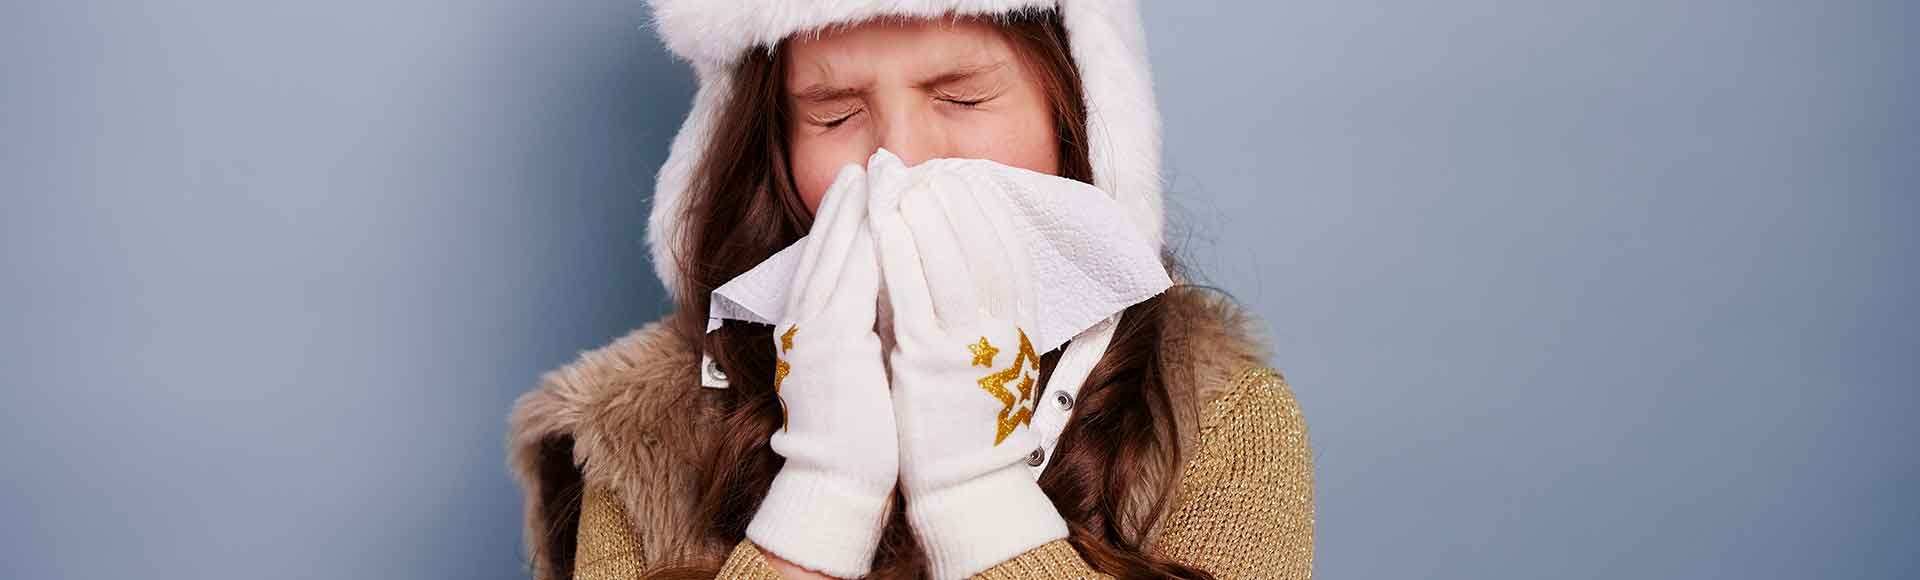 How To Keep Your Child Healthy During Cold and Flu Season